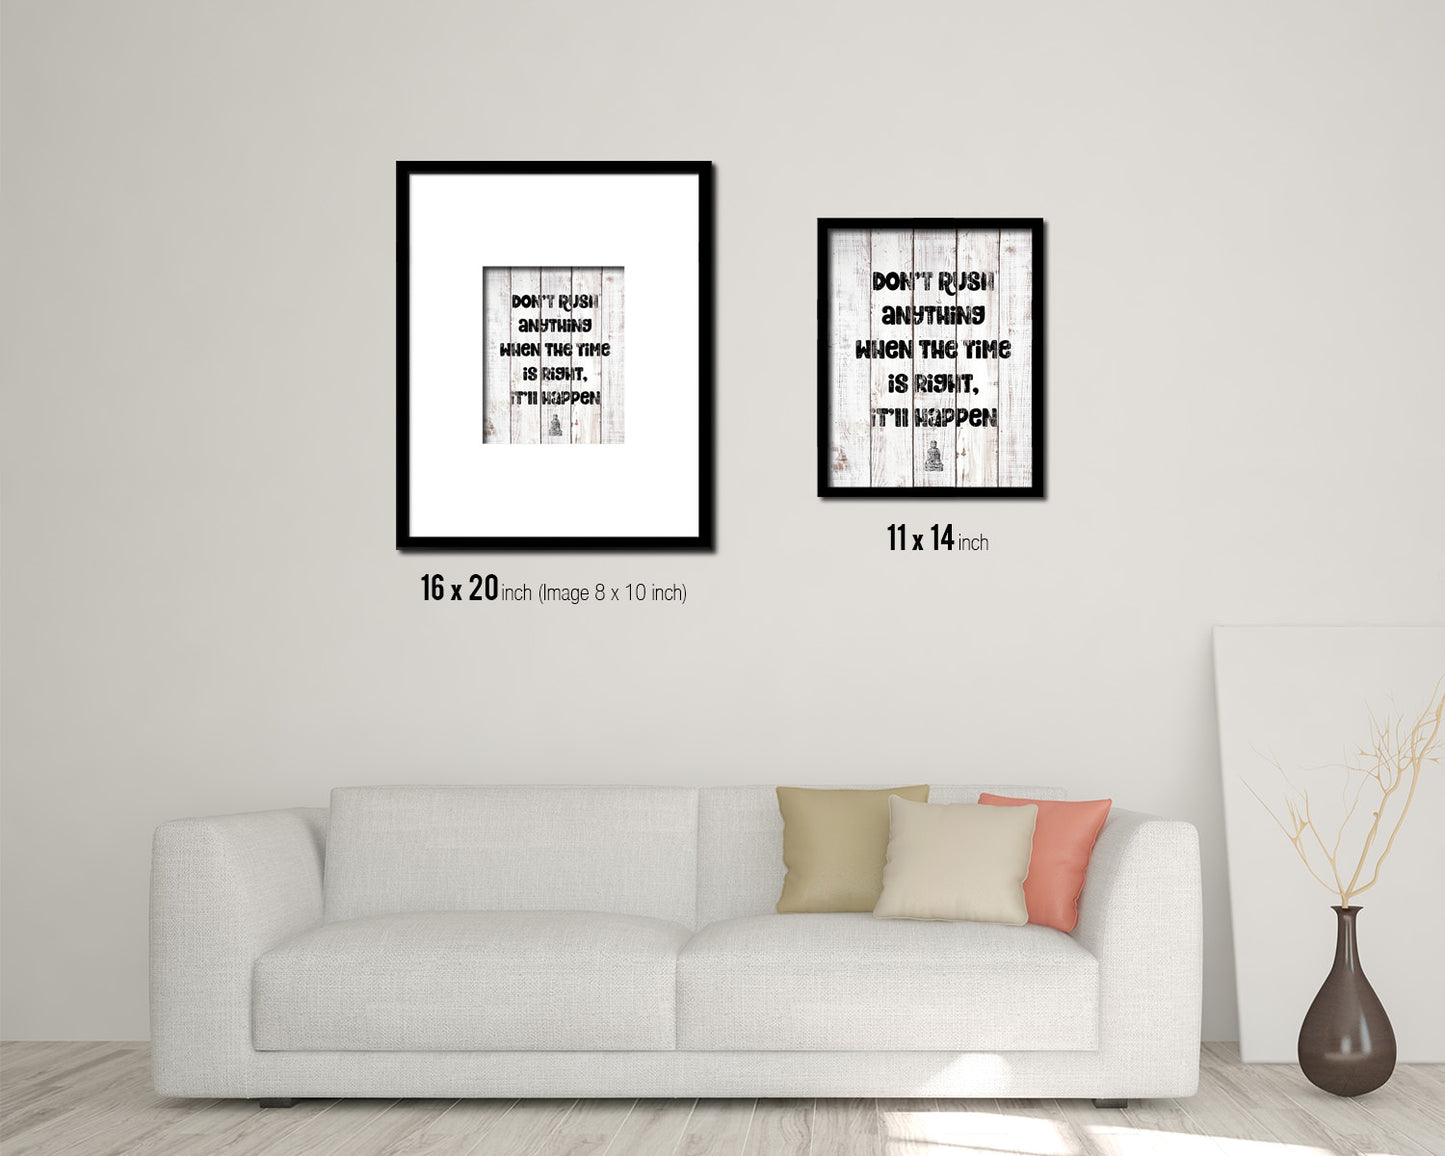 Don't rush anything when the time is right White Wash Quote Framed Print Wall Decor Art